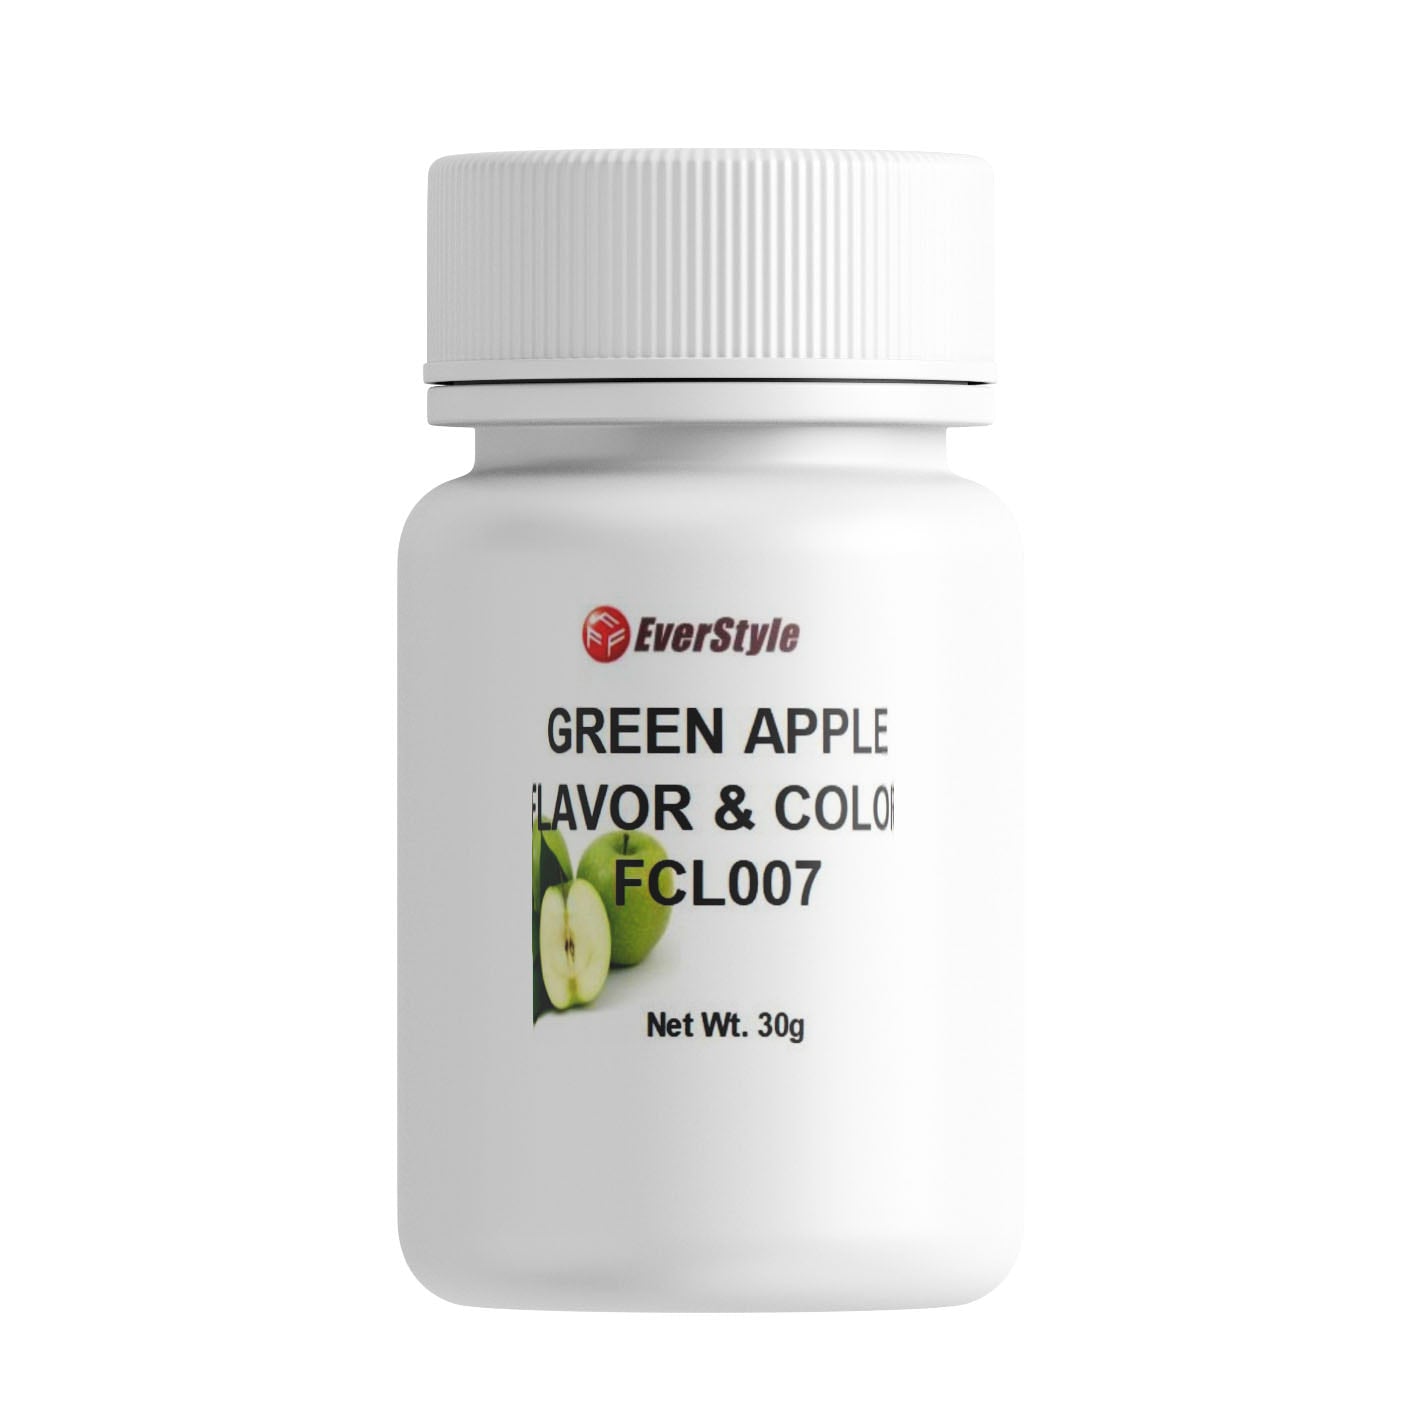 Everstyle Green Apple Flavor and Color 30g (FCL007)